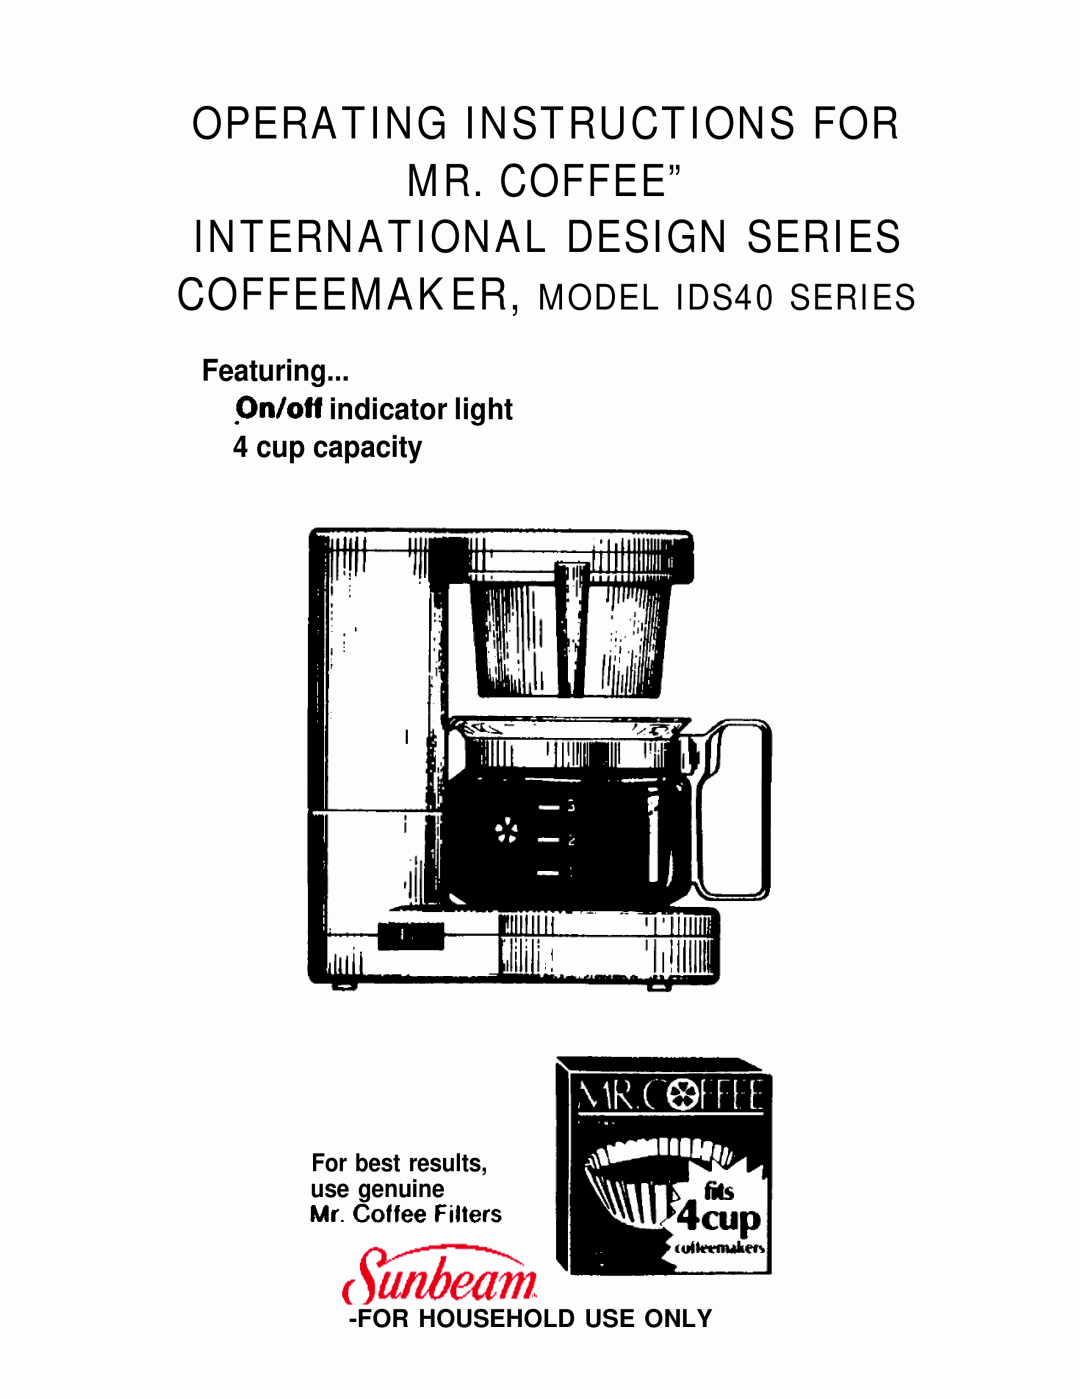 Mr. Coffee IDS40 manual Operating Instructions For Mr. Coffee”, International Design Series, Cnffoe Filters 